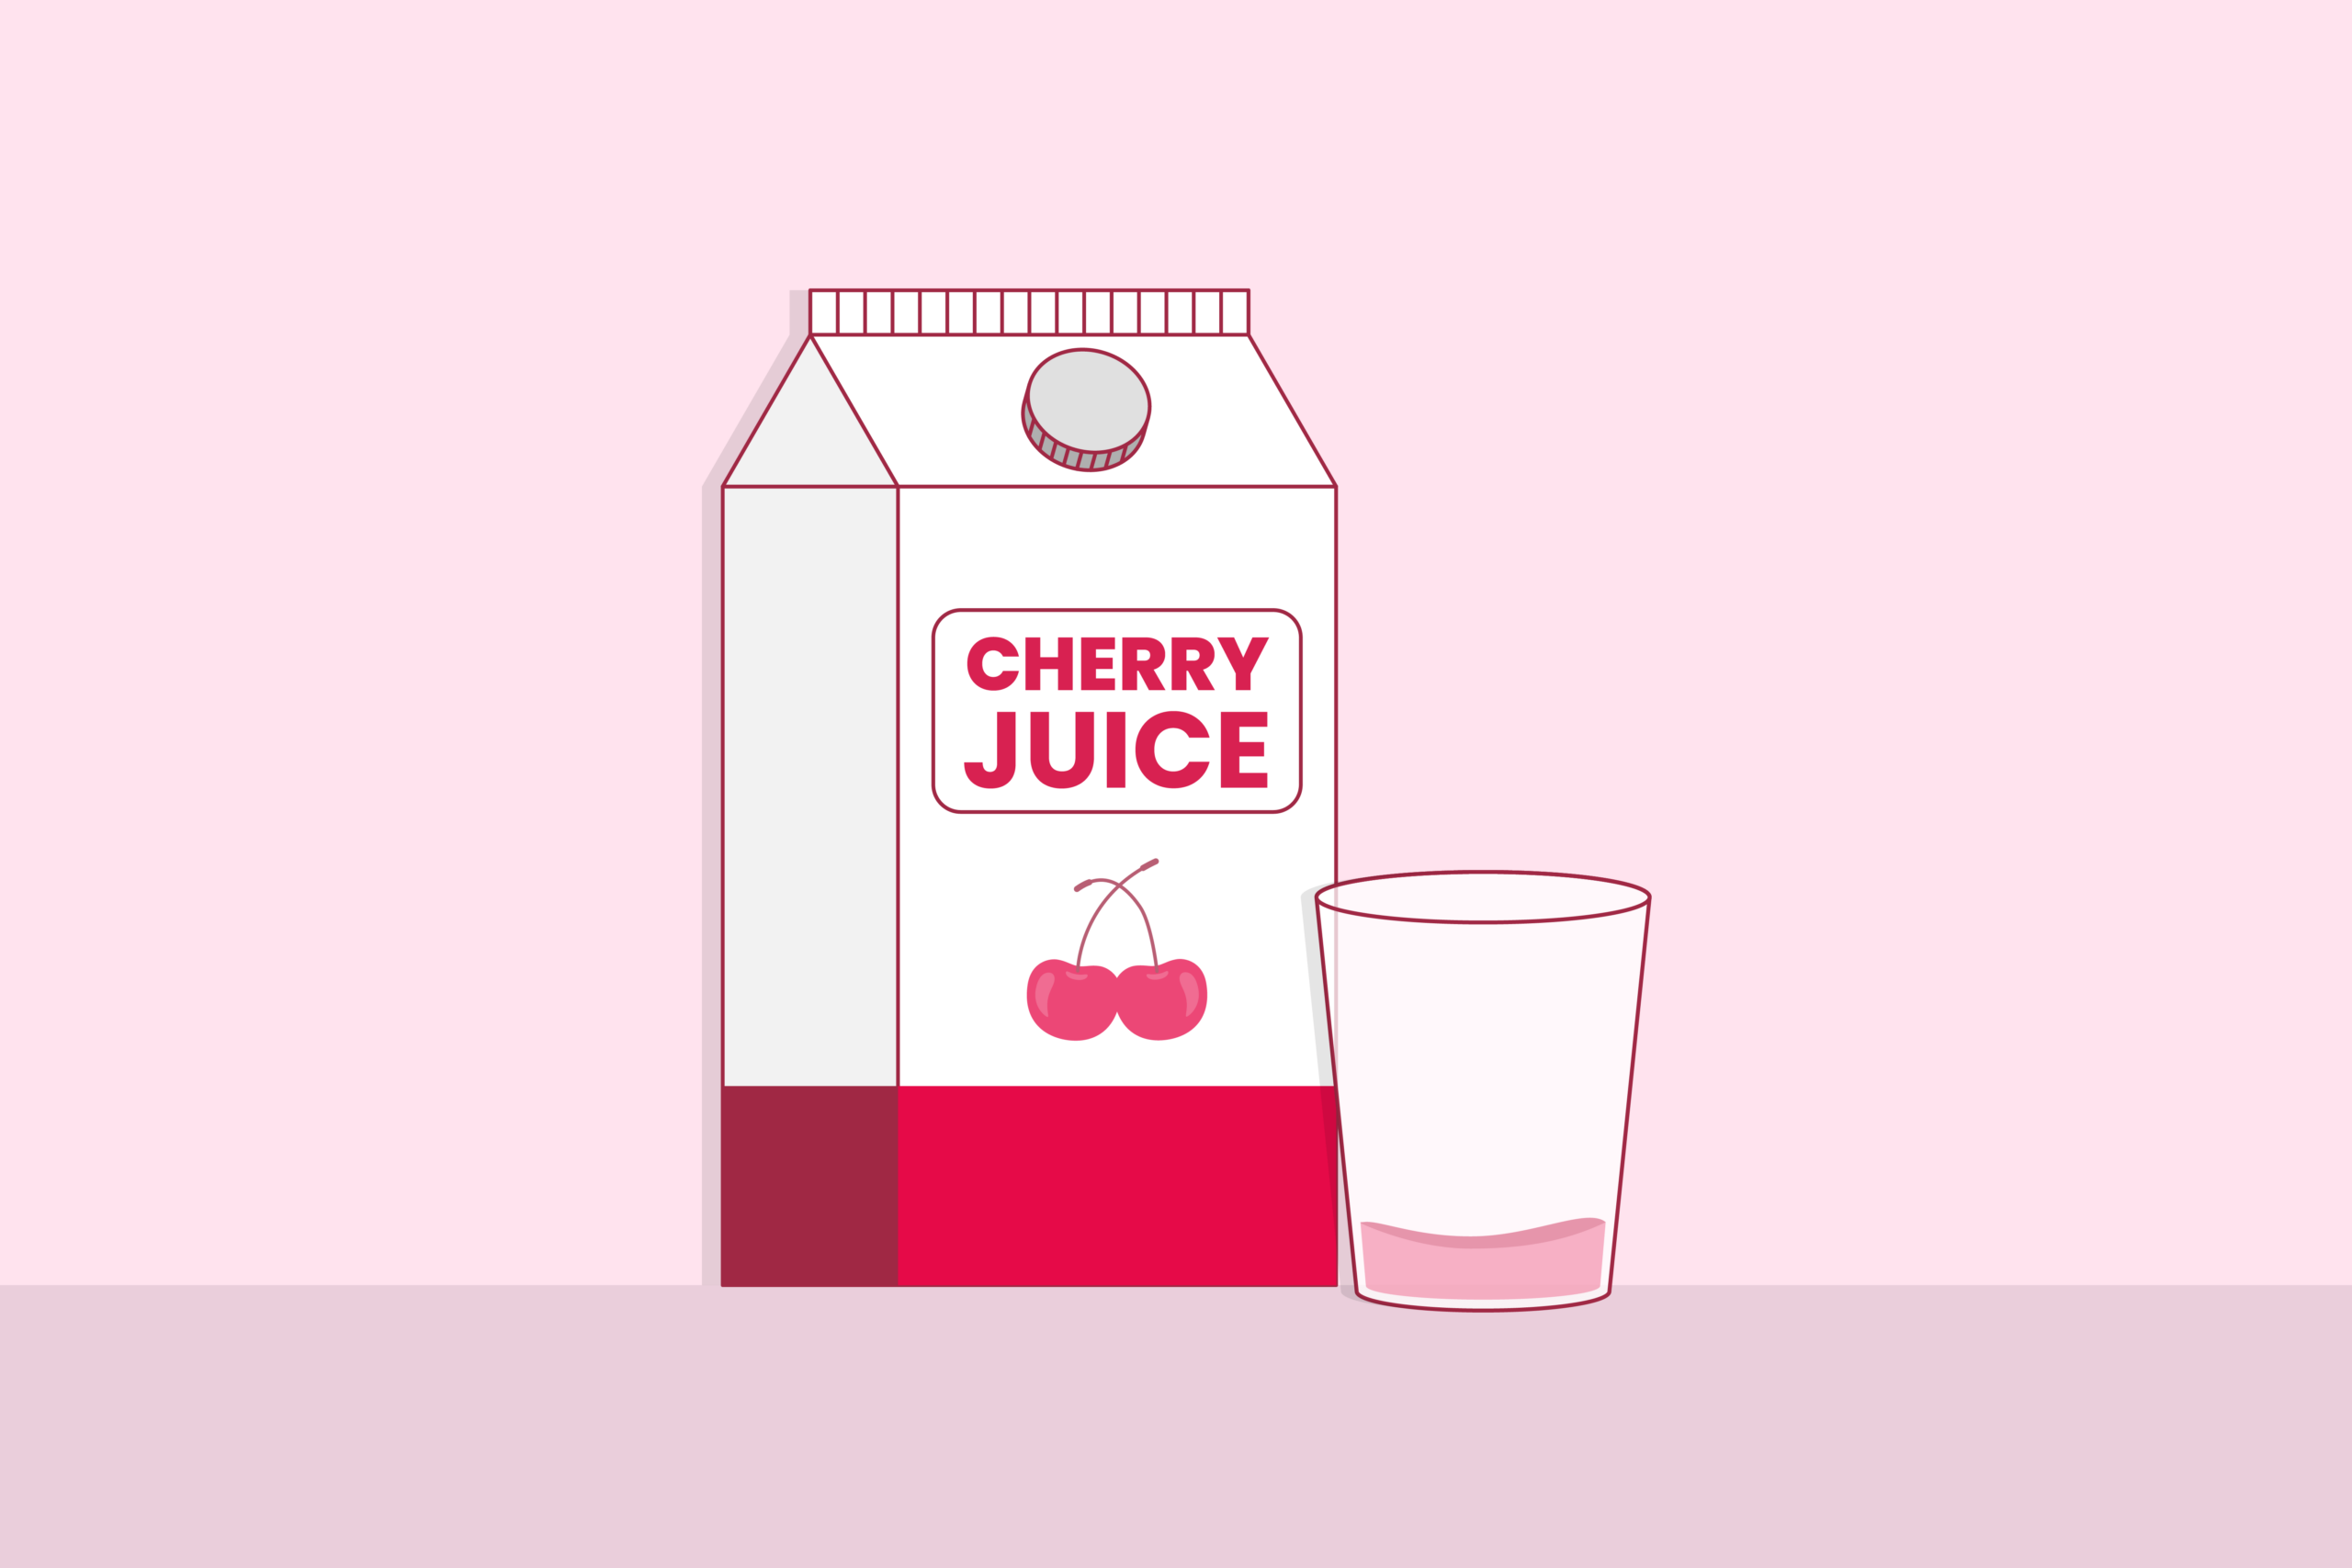 Tart Cherry Sleep Supportive Drink Recipe that will MAXIMIZE Your